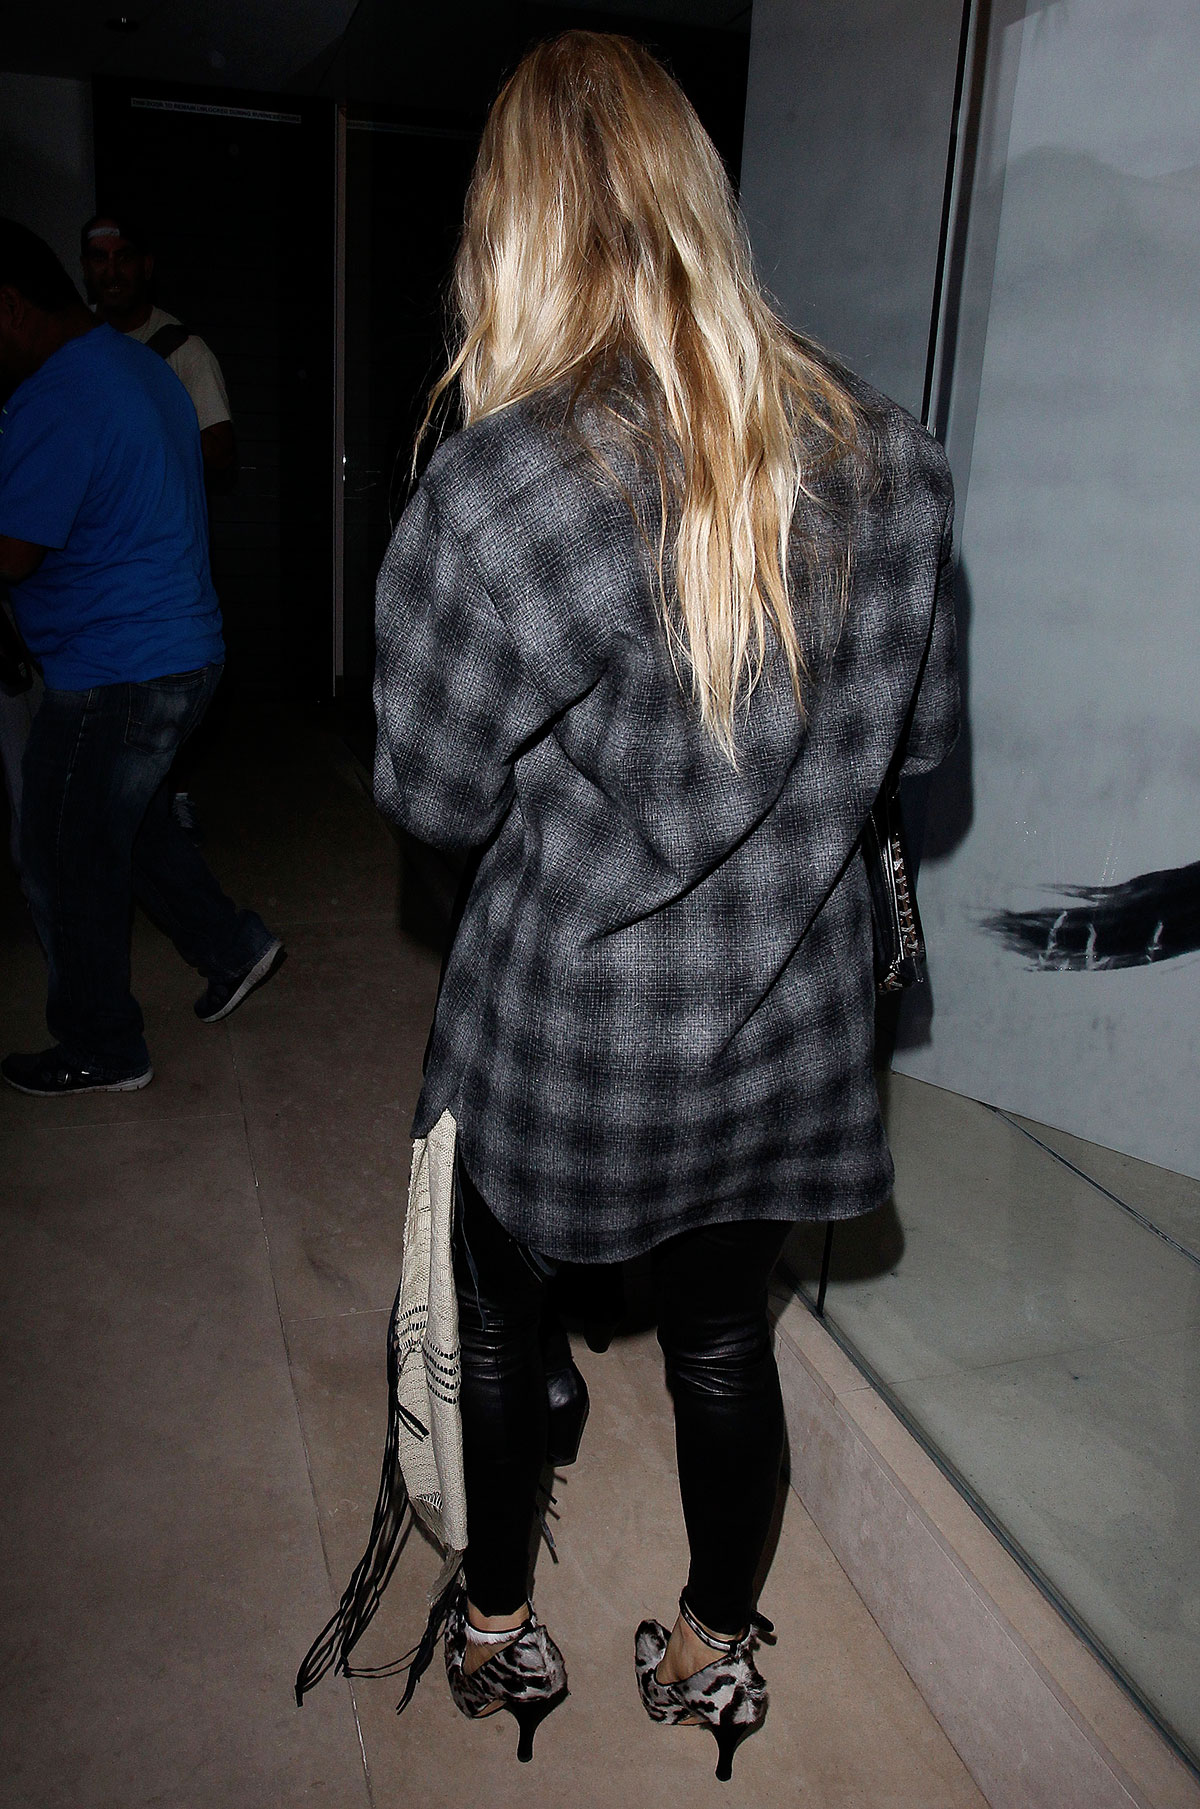 Fergie shopping In Beverly Hills